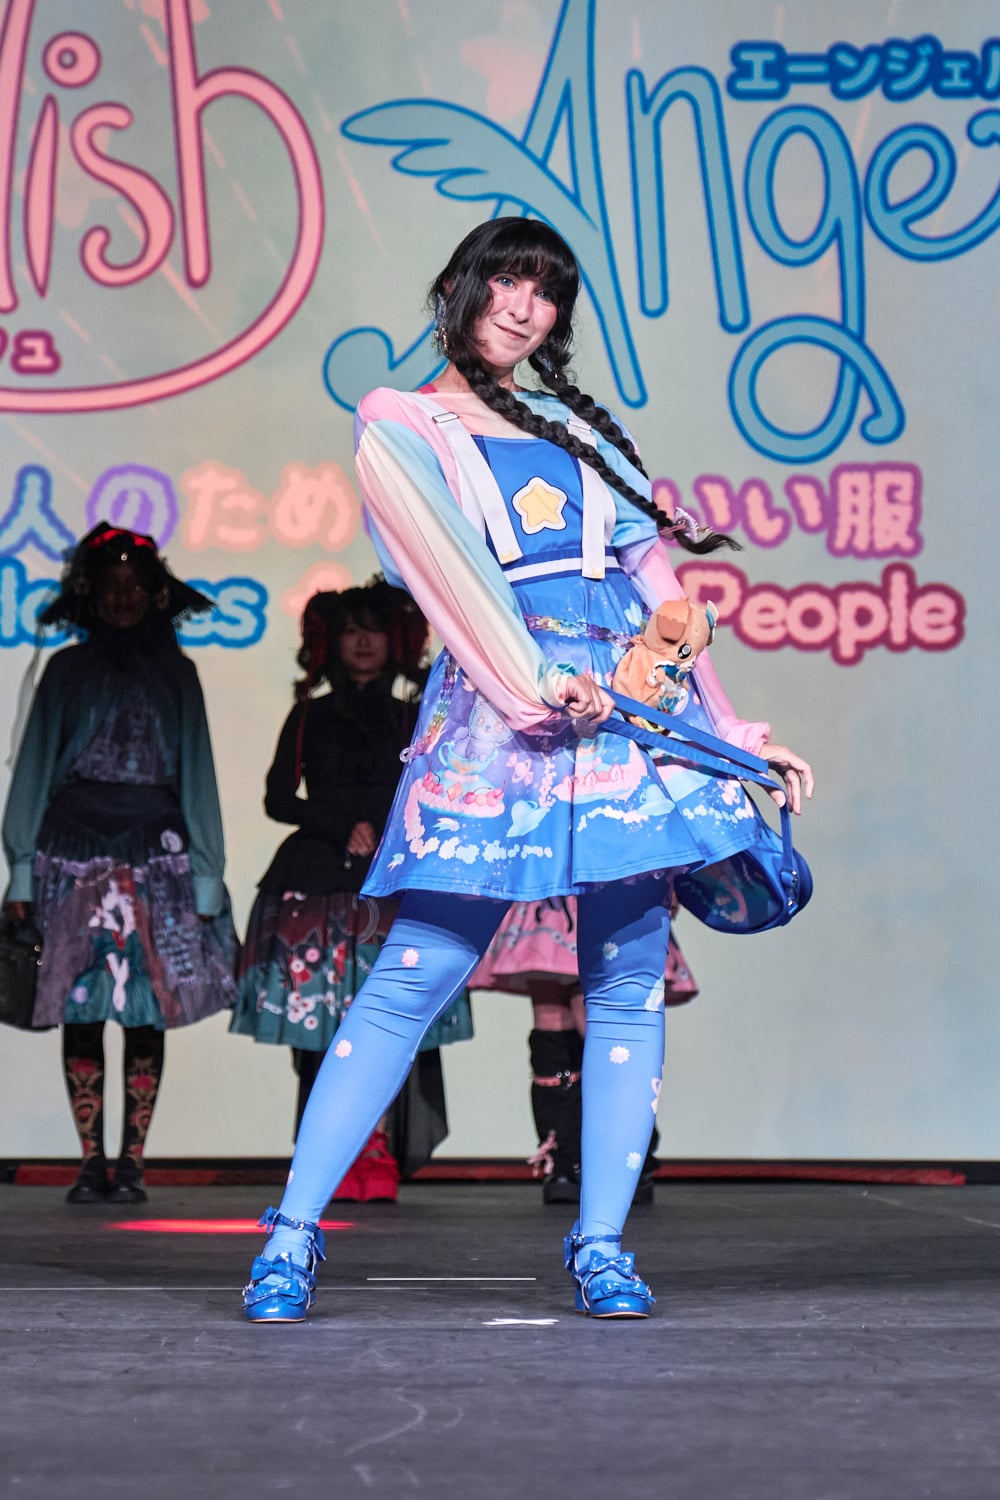 Model wearing bright blue top, knee skirt, and leggings featuring cats and star motifs - full body pose 1.